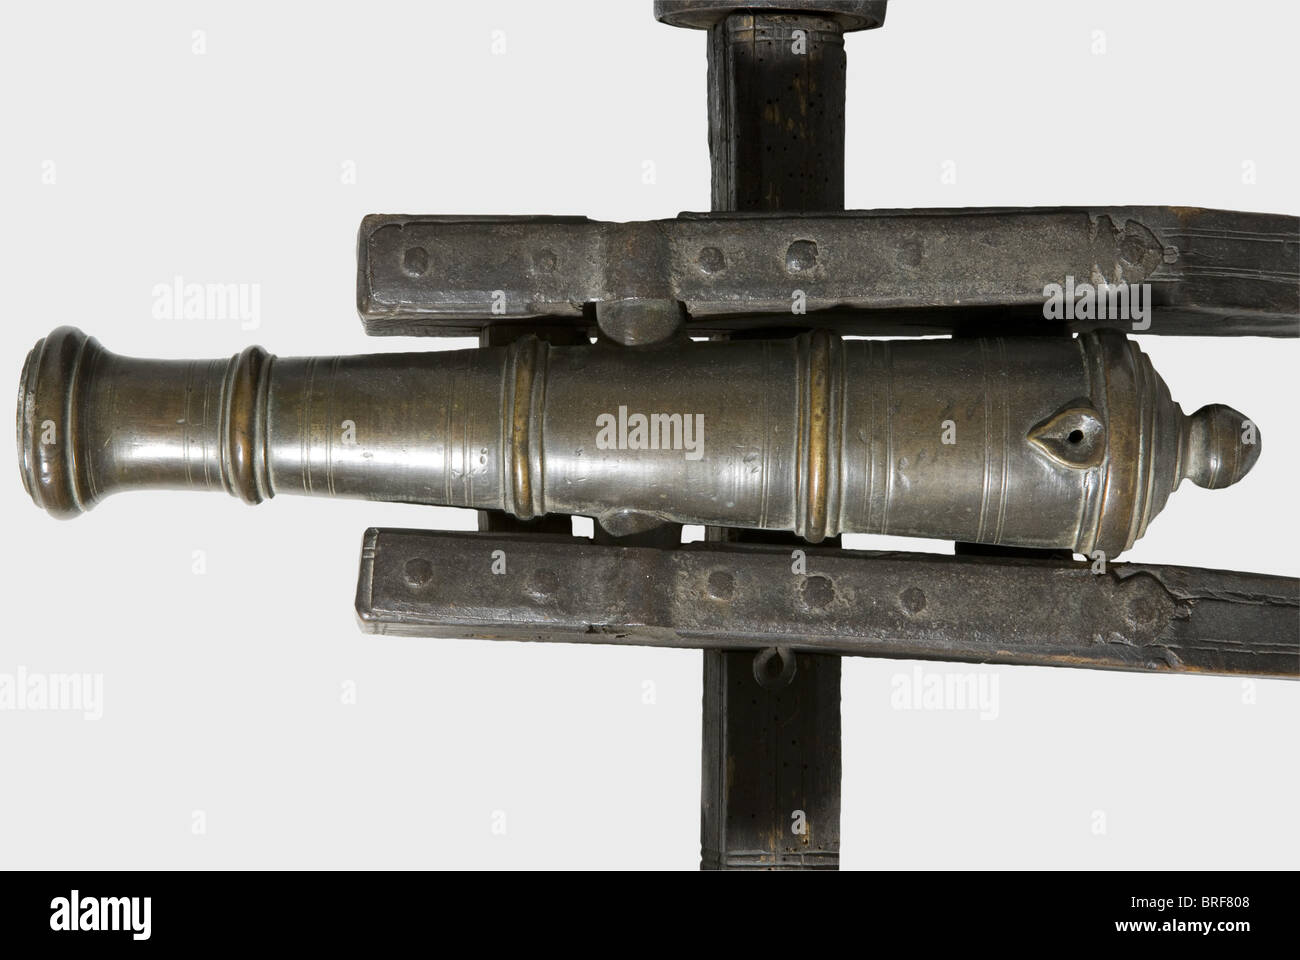 A model of a field cannon, 17th/18th century. Slender bronze barrel in 27 mm calibre with a cannon muzzle, two side-mounted trunnions, and a touchhole in a heart-shaped depression on top. Wooden carriage (some worm damage) with iron fittings and iron mounted wheels with spokes. Barrel length 39 cm. Total length 78 cm. historic, historical,, 18th century, 17th century, cannon, cannons, artillery, firearm, fire arm, firearms, fire arms, weapons, arms, weapon, arm, fighting device, military, militaria, object, objects, stills, clipping, clippings, cut out, cut-out, Stock Photo